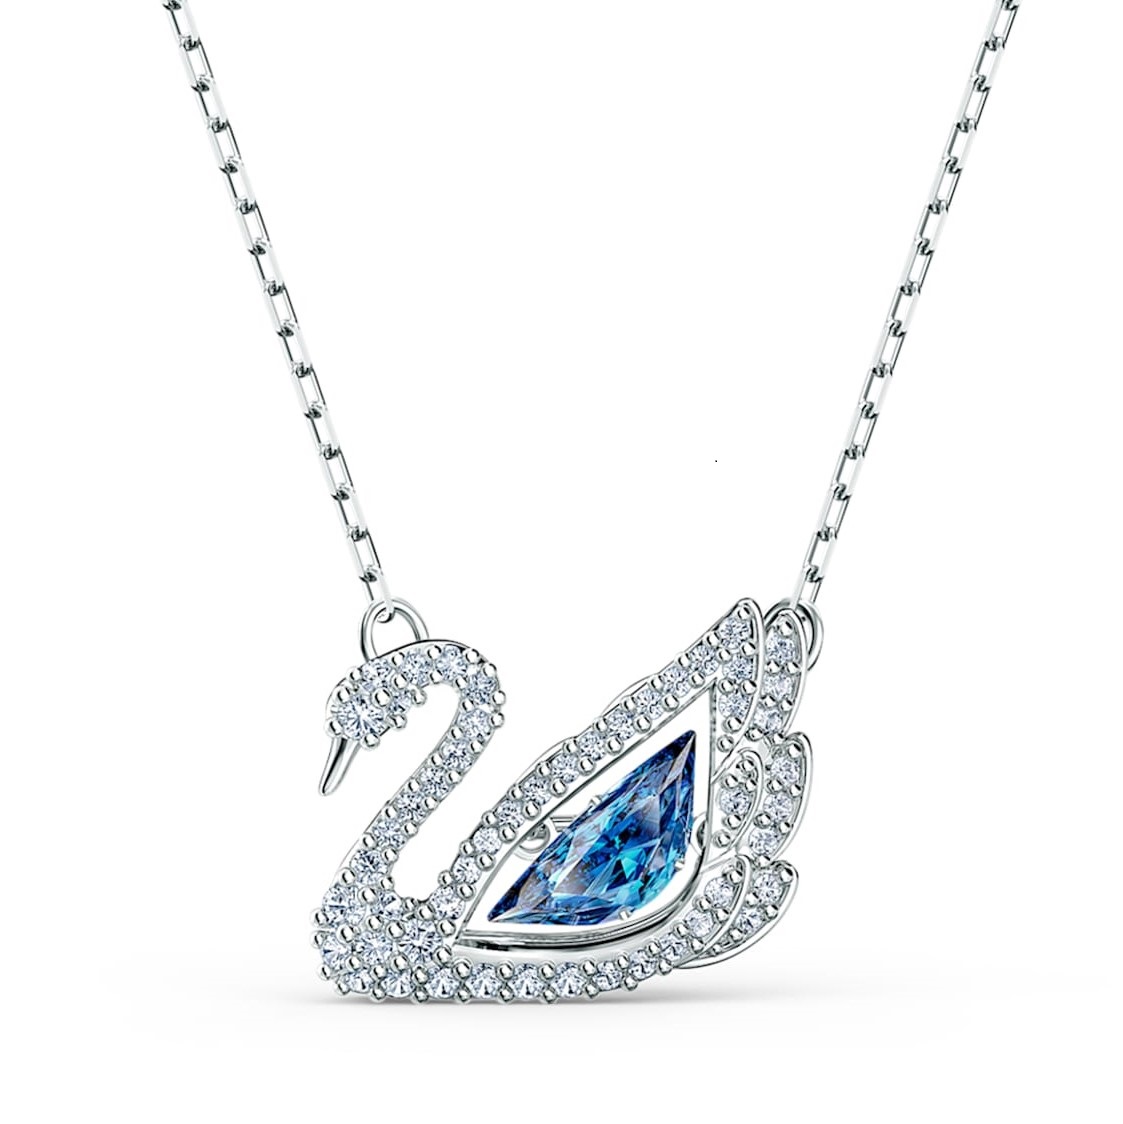 DÂY CHUYỀN NỮ DANCING SWAN NECKLACE, BLUE, RHODIUM PLATED 1